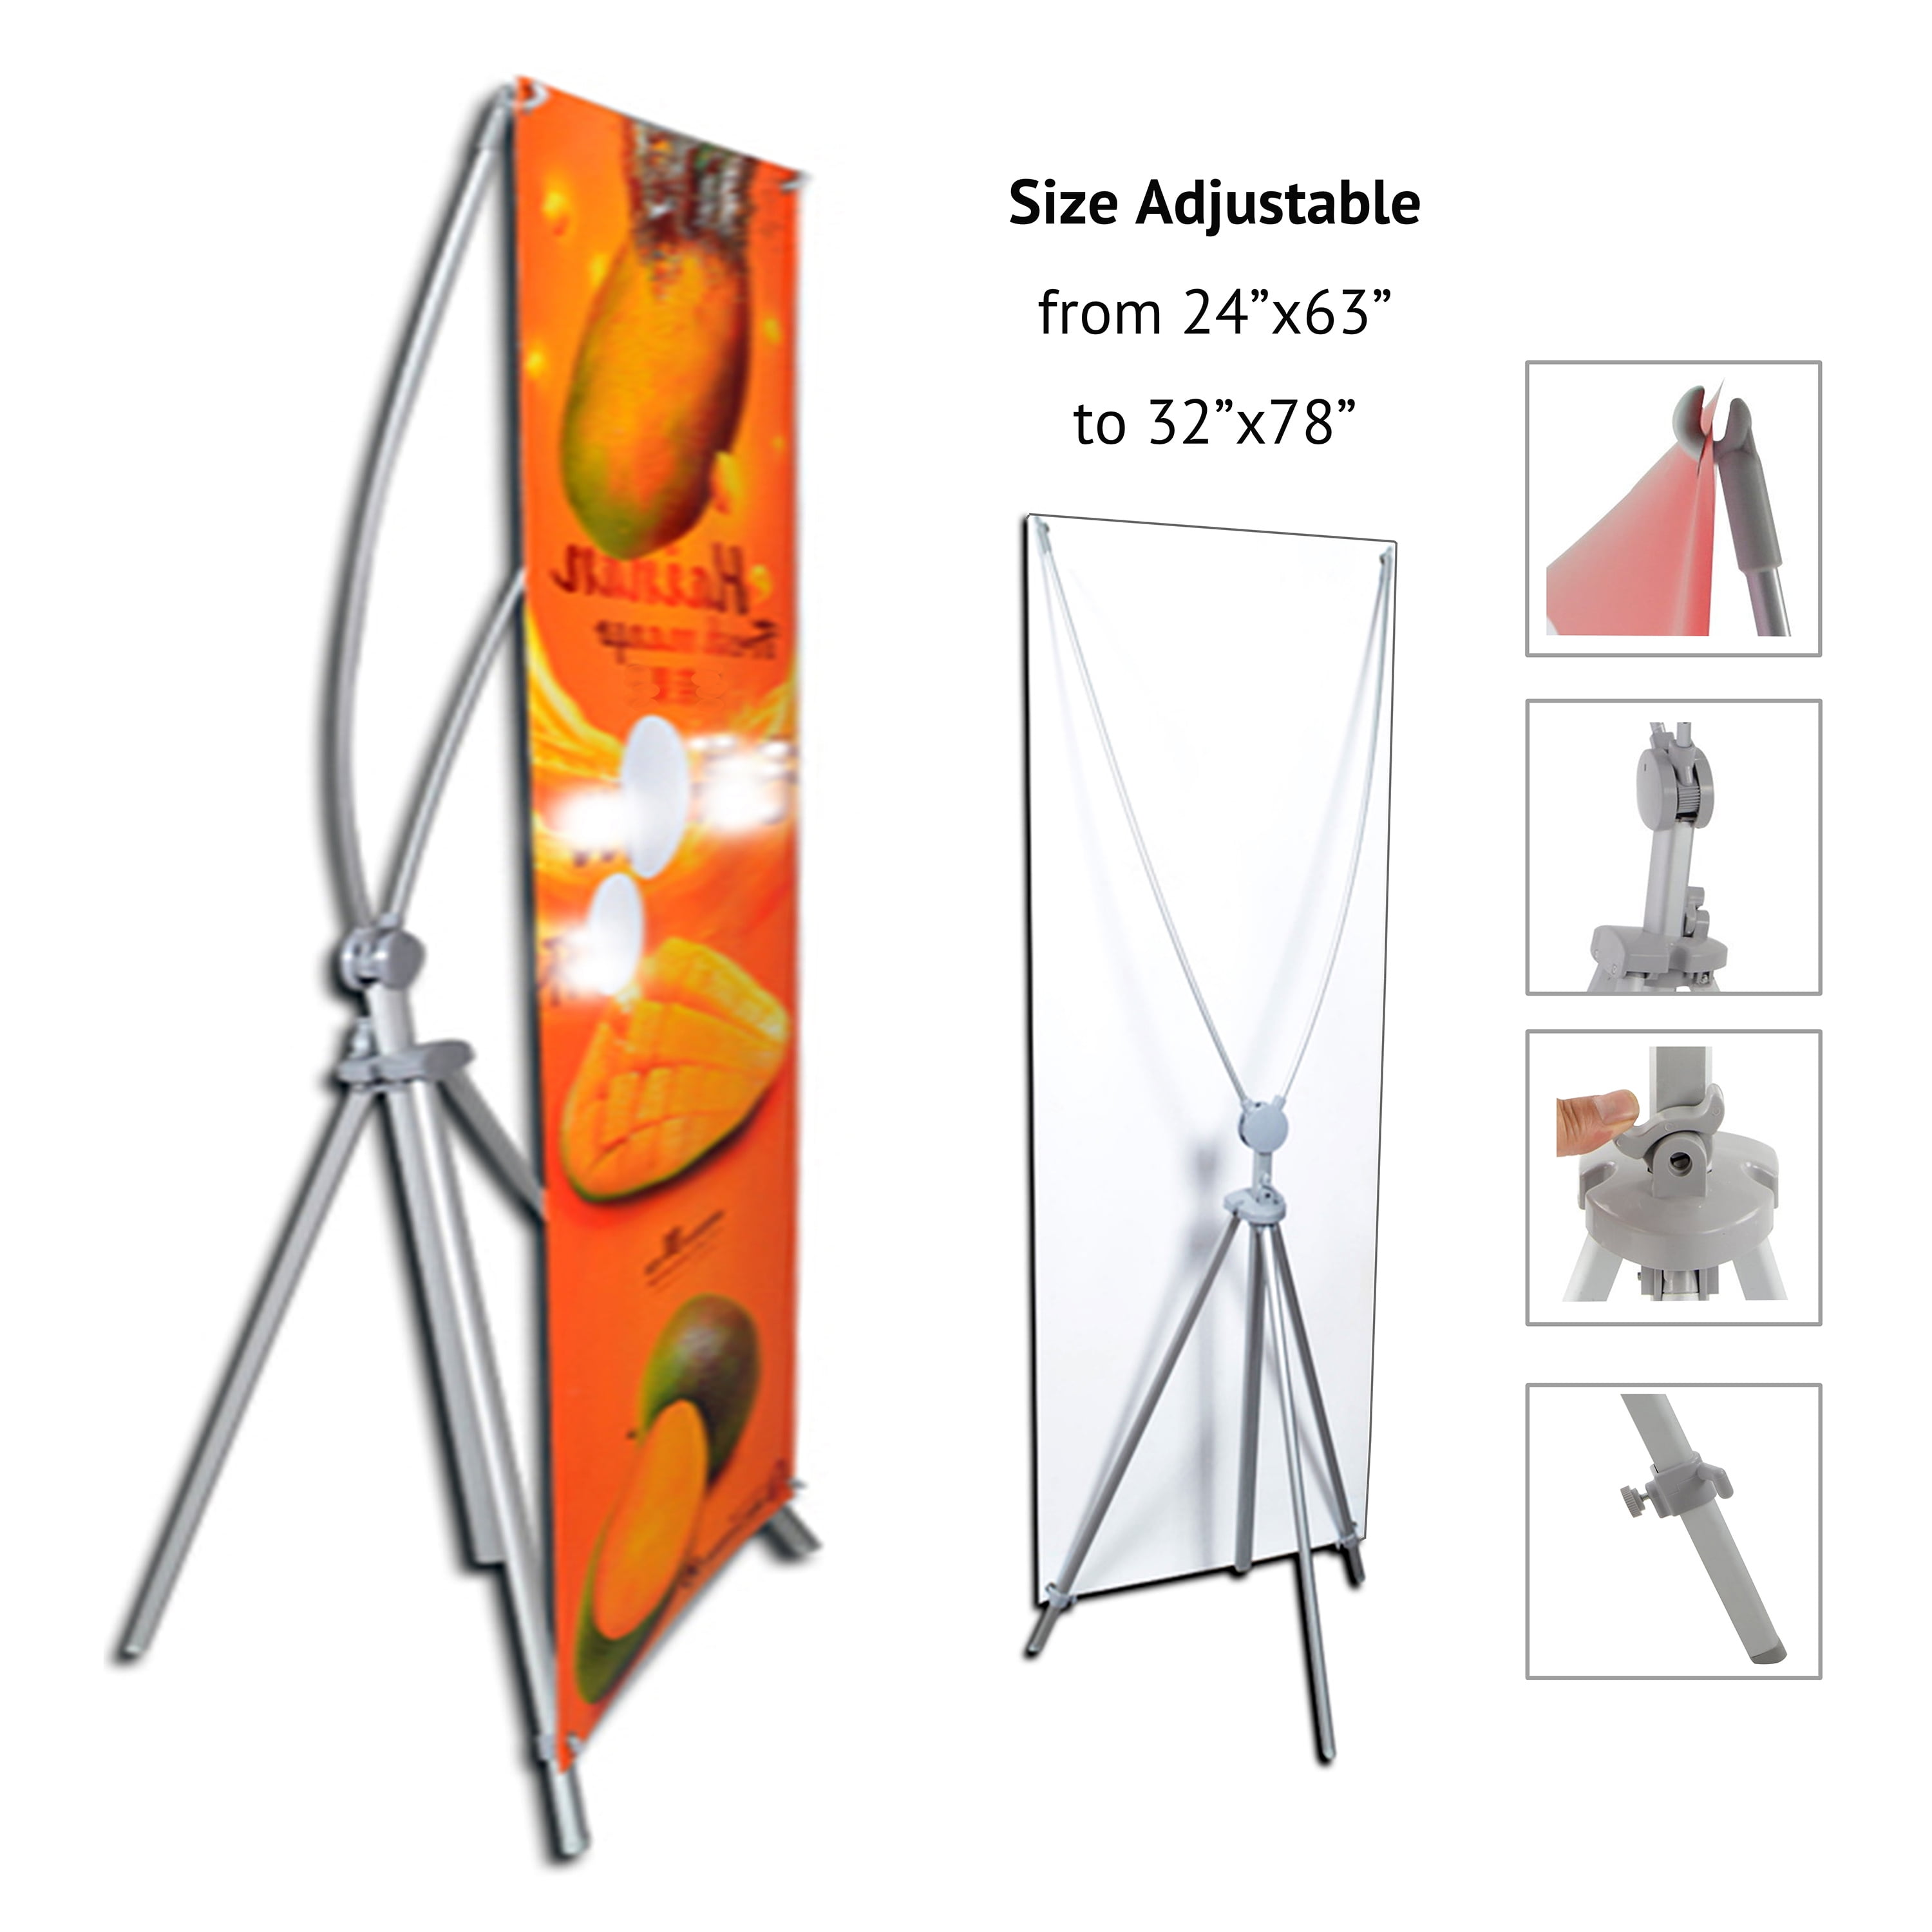 Banner Stand Adjustable Height for Grommeted Signs in 2 Sizes 23"x63" or 31"x71" 